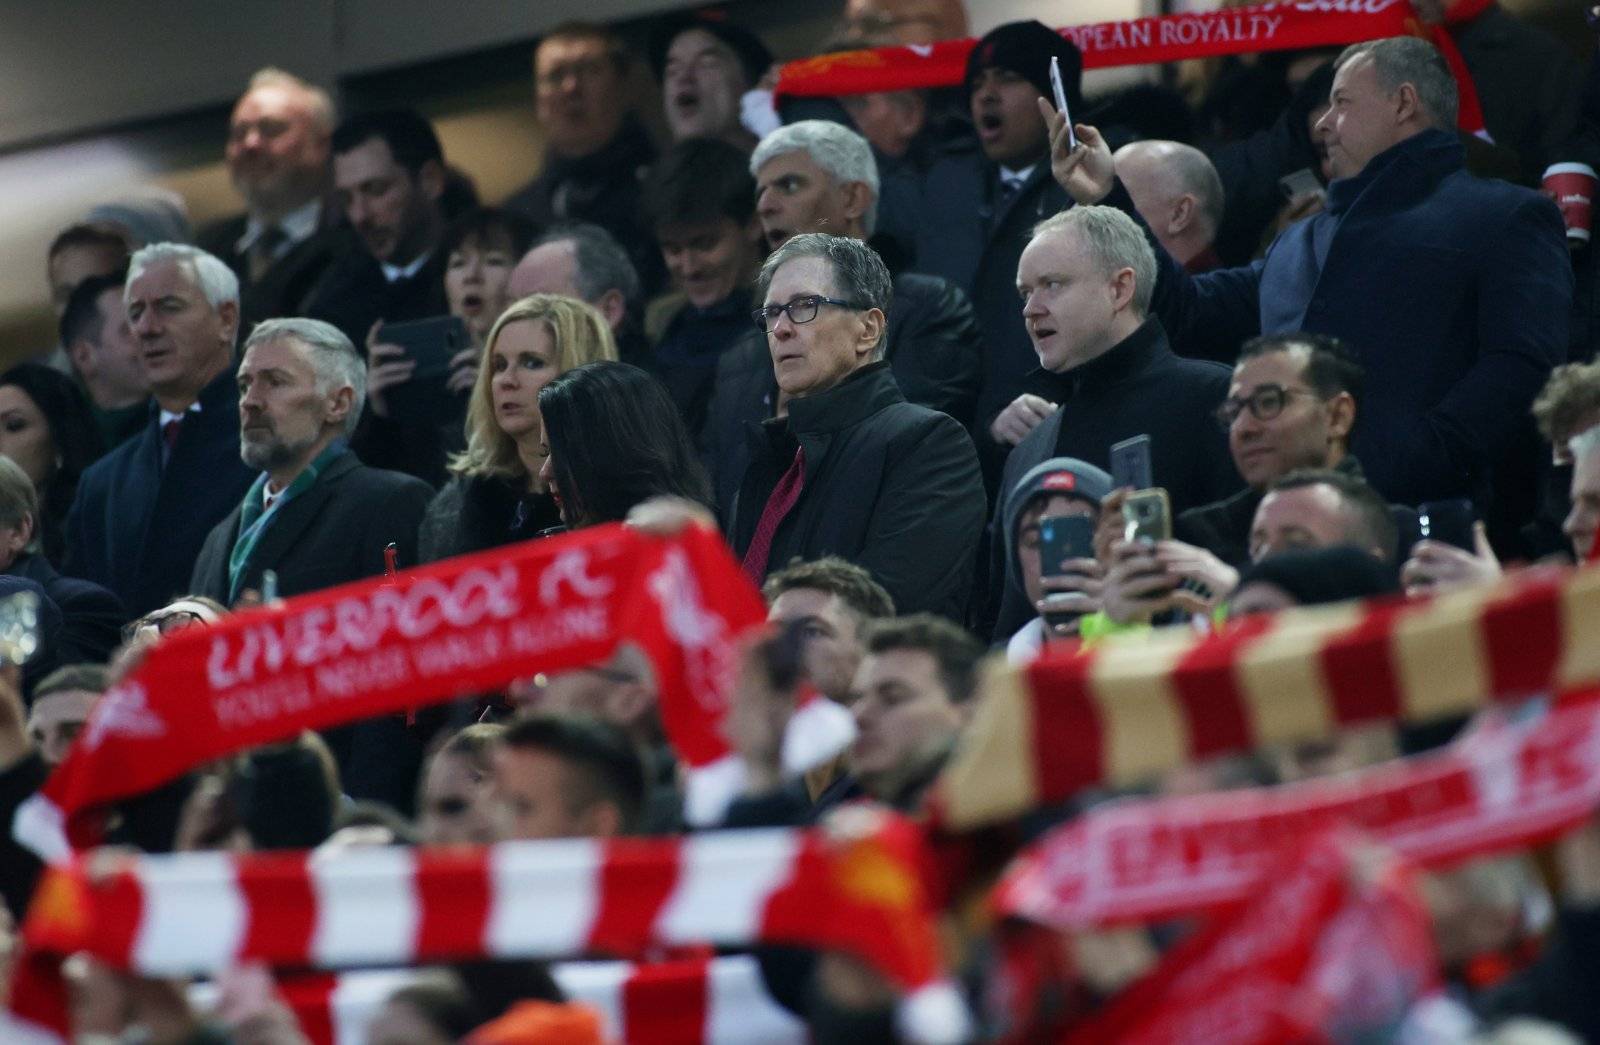 Liverpool: No interested parties to buy FSG shares - Liverpool News